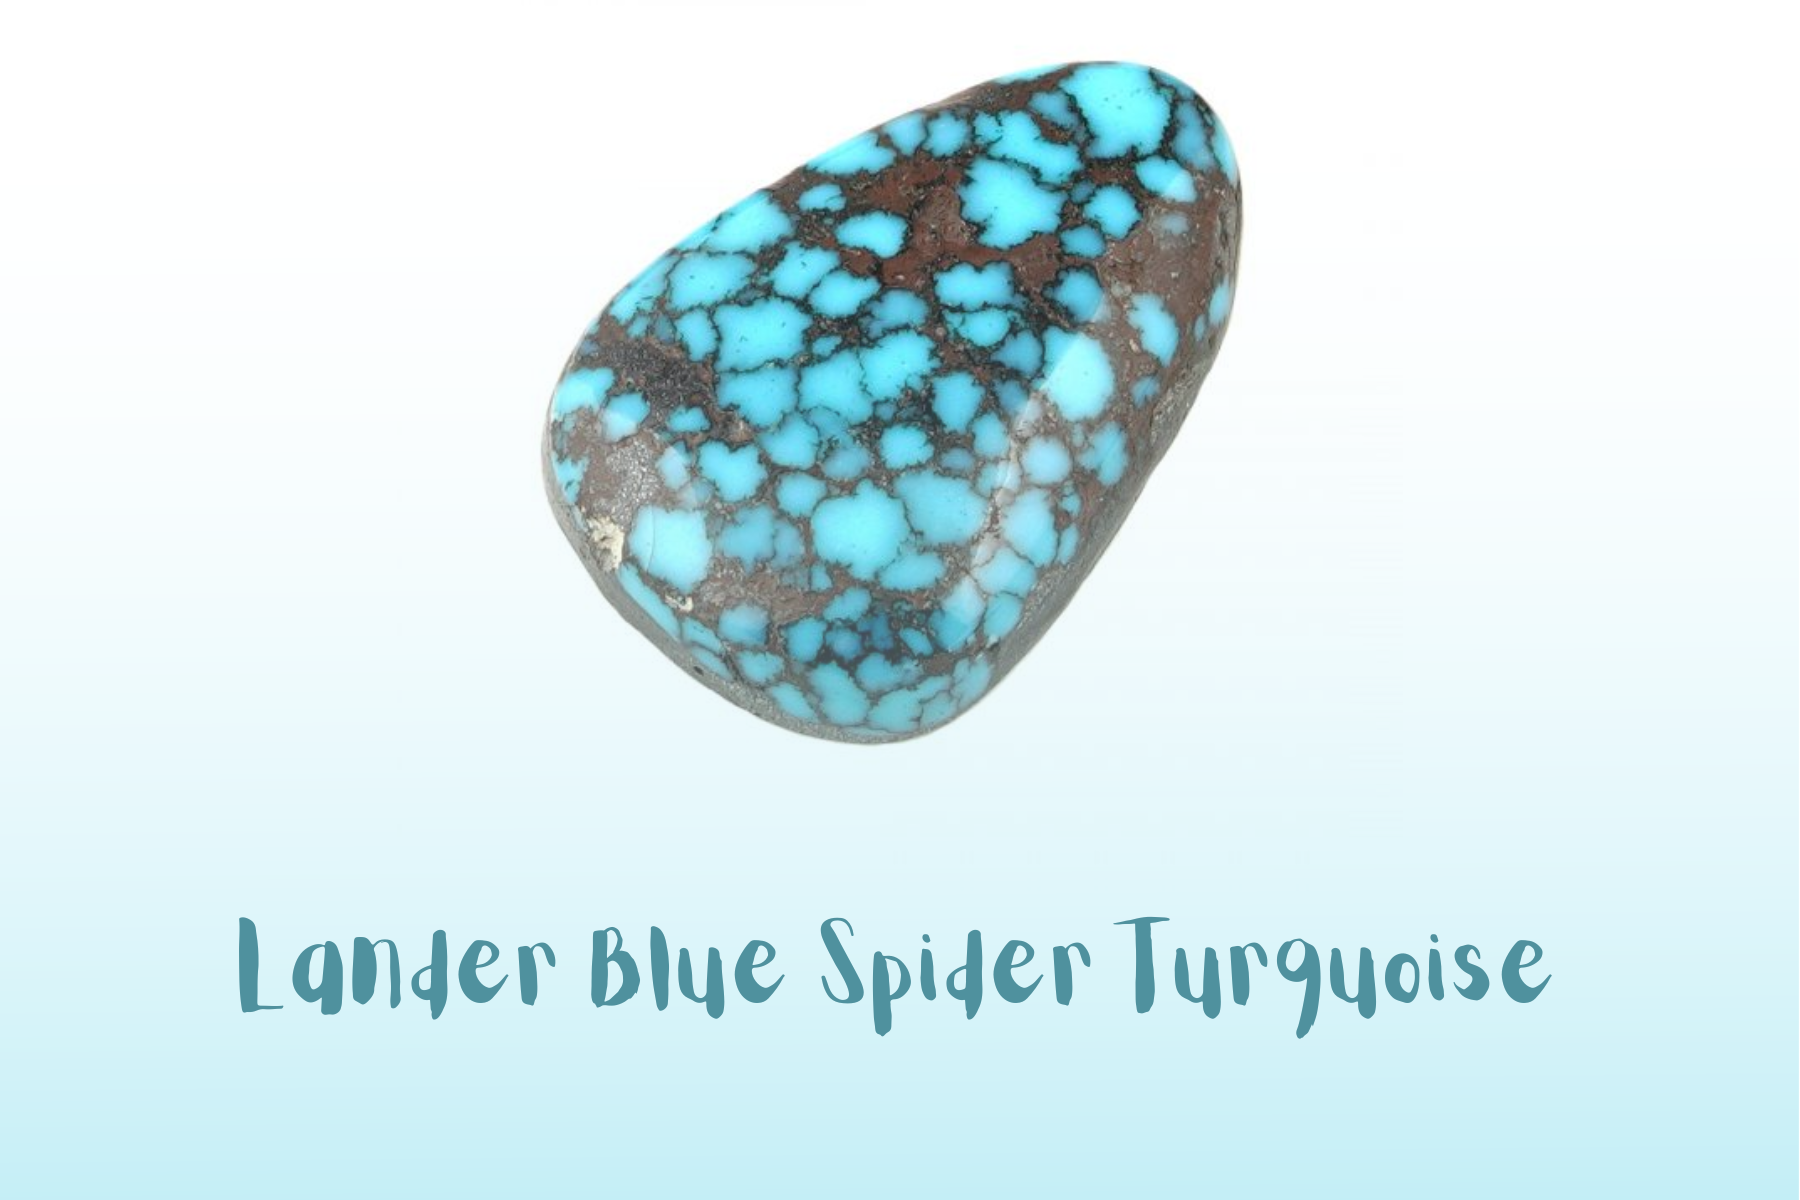 A lander blue stone with a spider web pattern